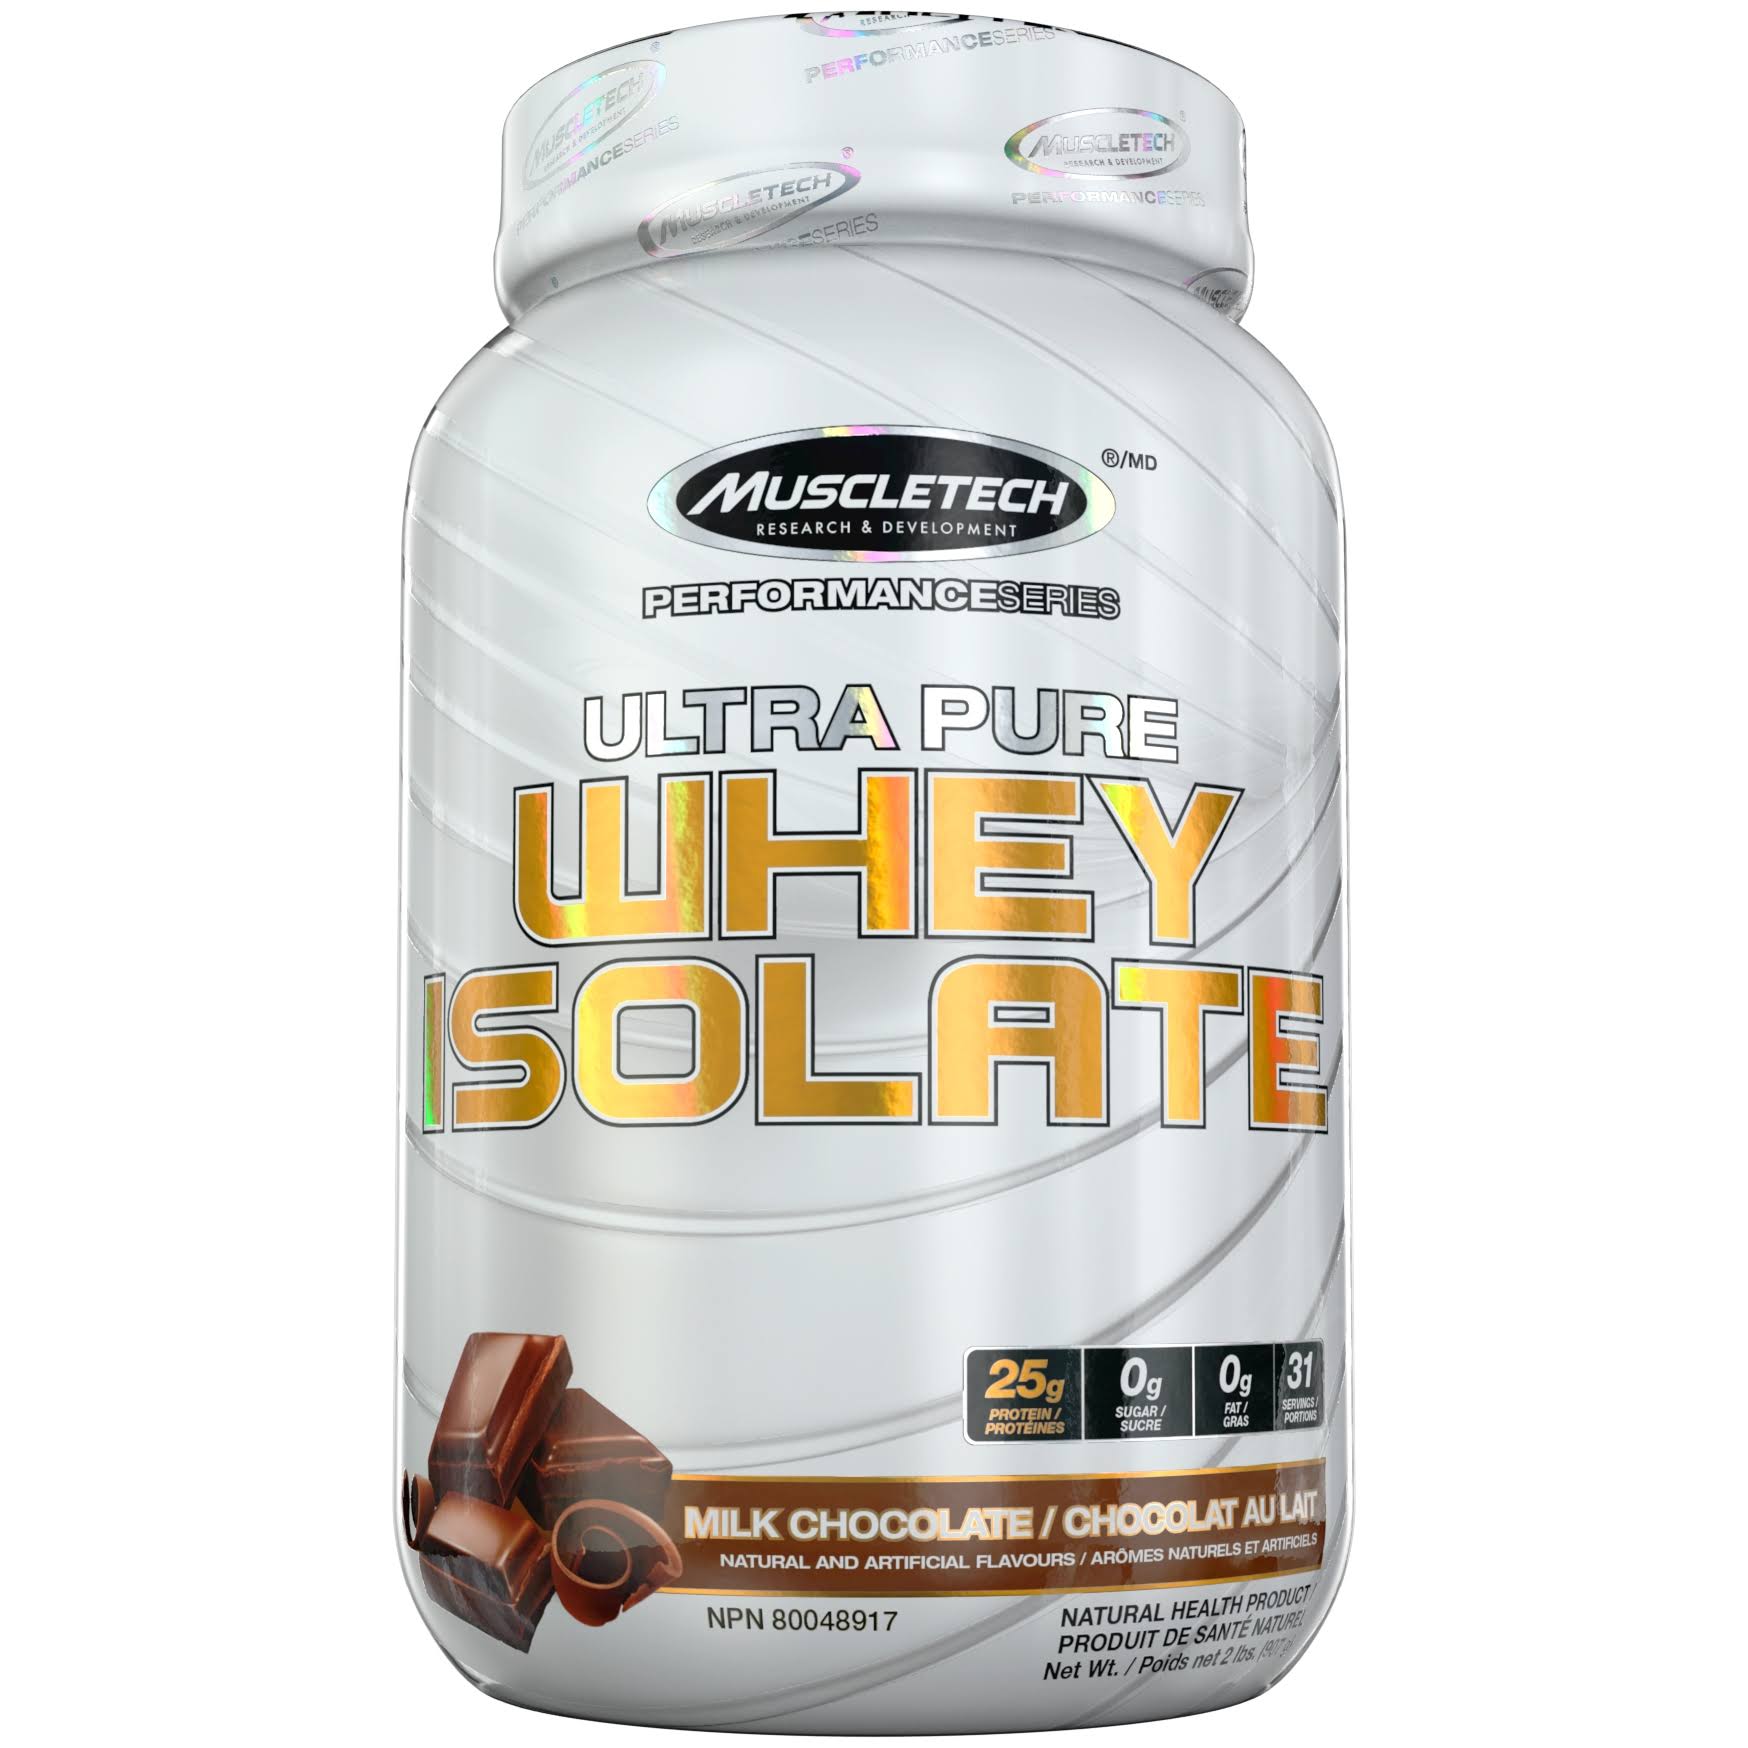 Muscle Tech Ultra Pure Whey Isolate Milk Chocolate 2lbs